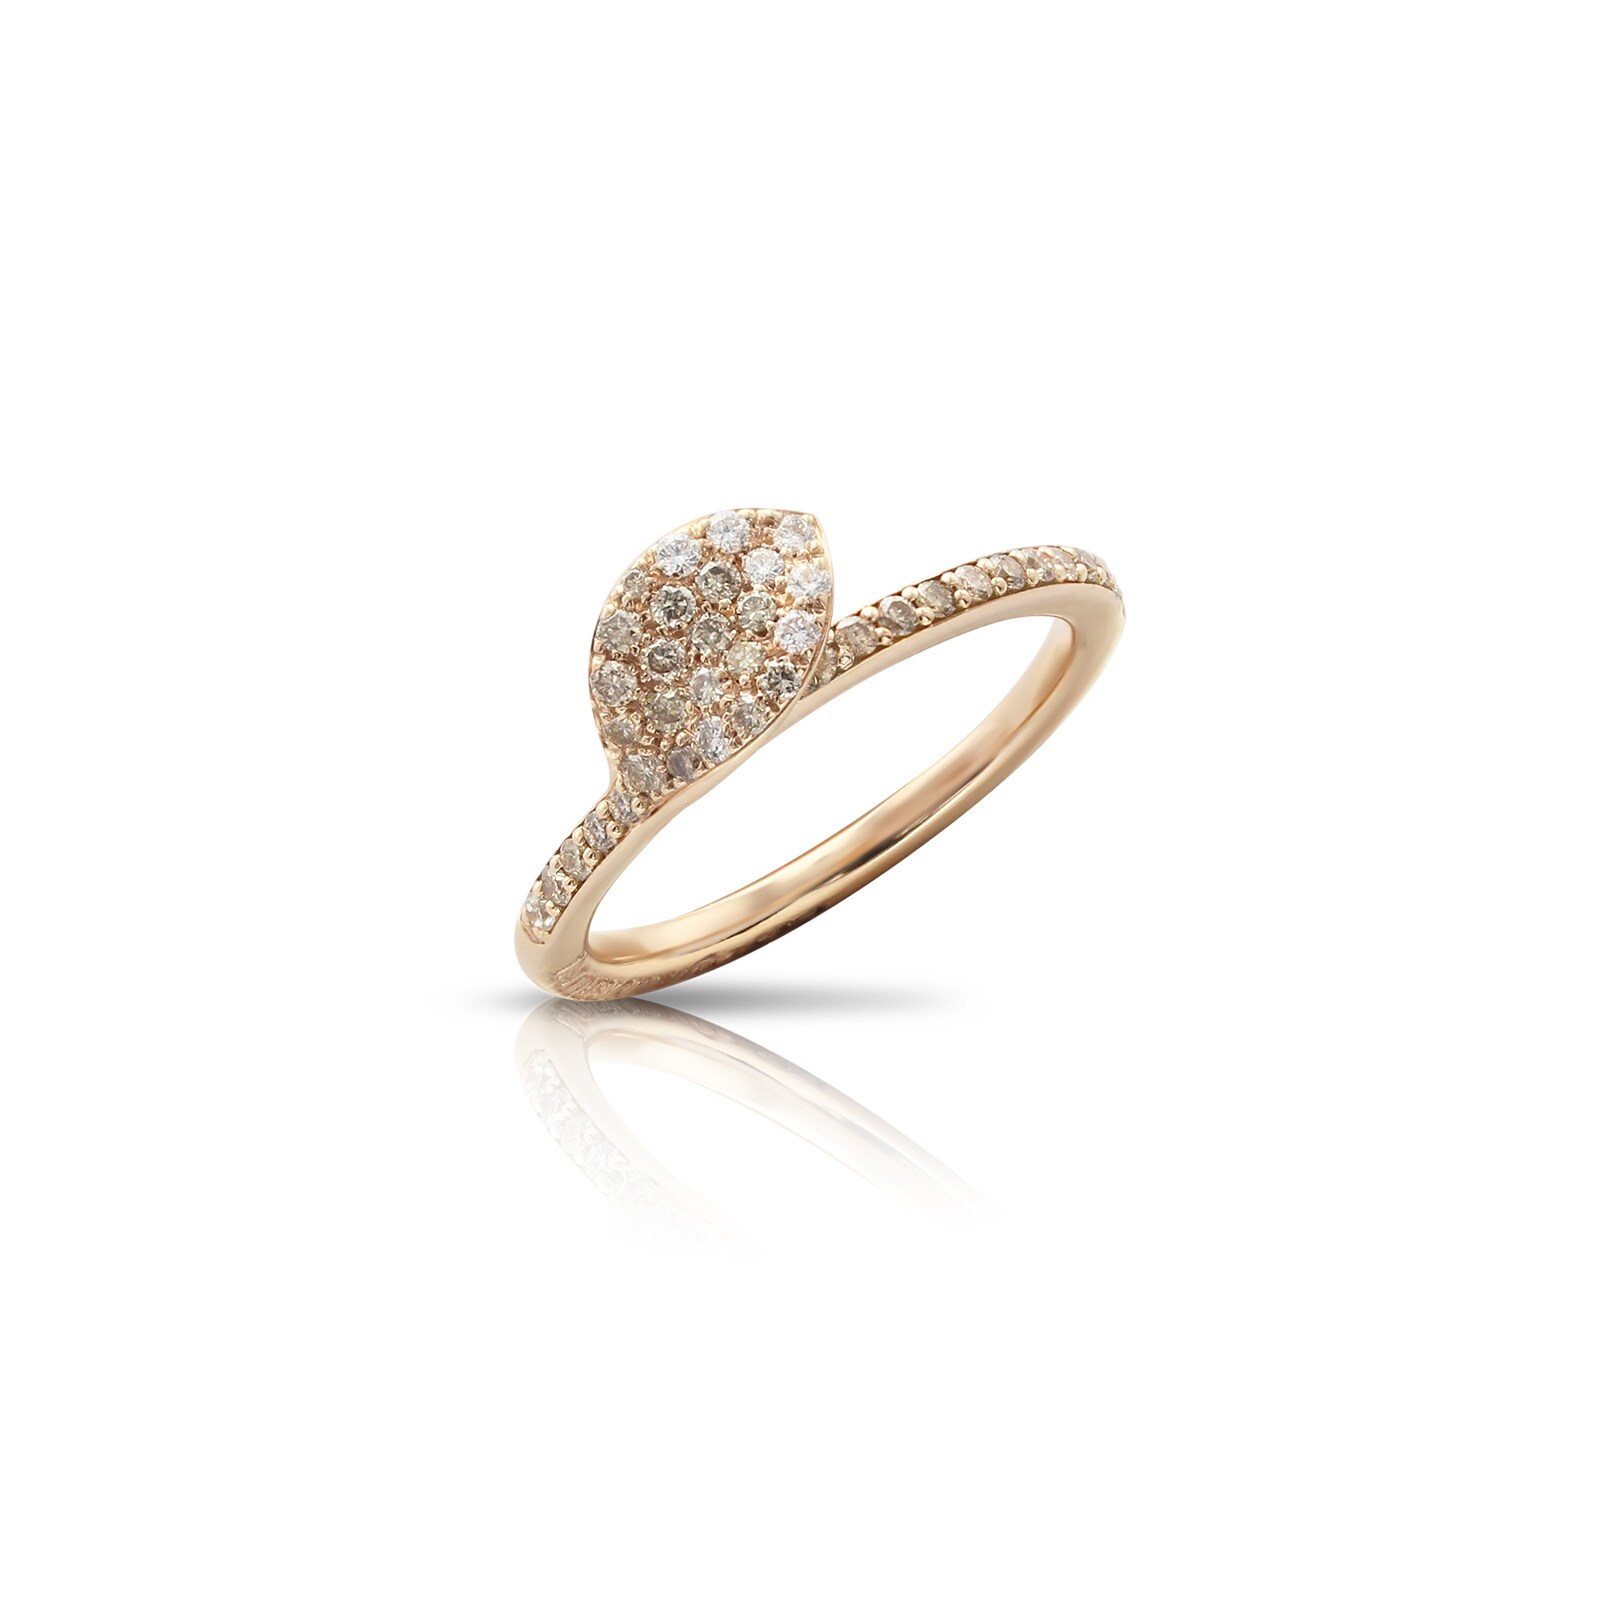 Petit Garden Single Ring in 18ct Rose Gold with White and Champagne Diamonds - Ring Size M